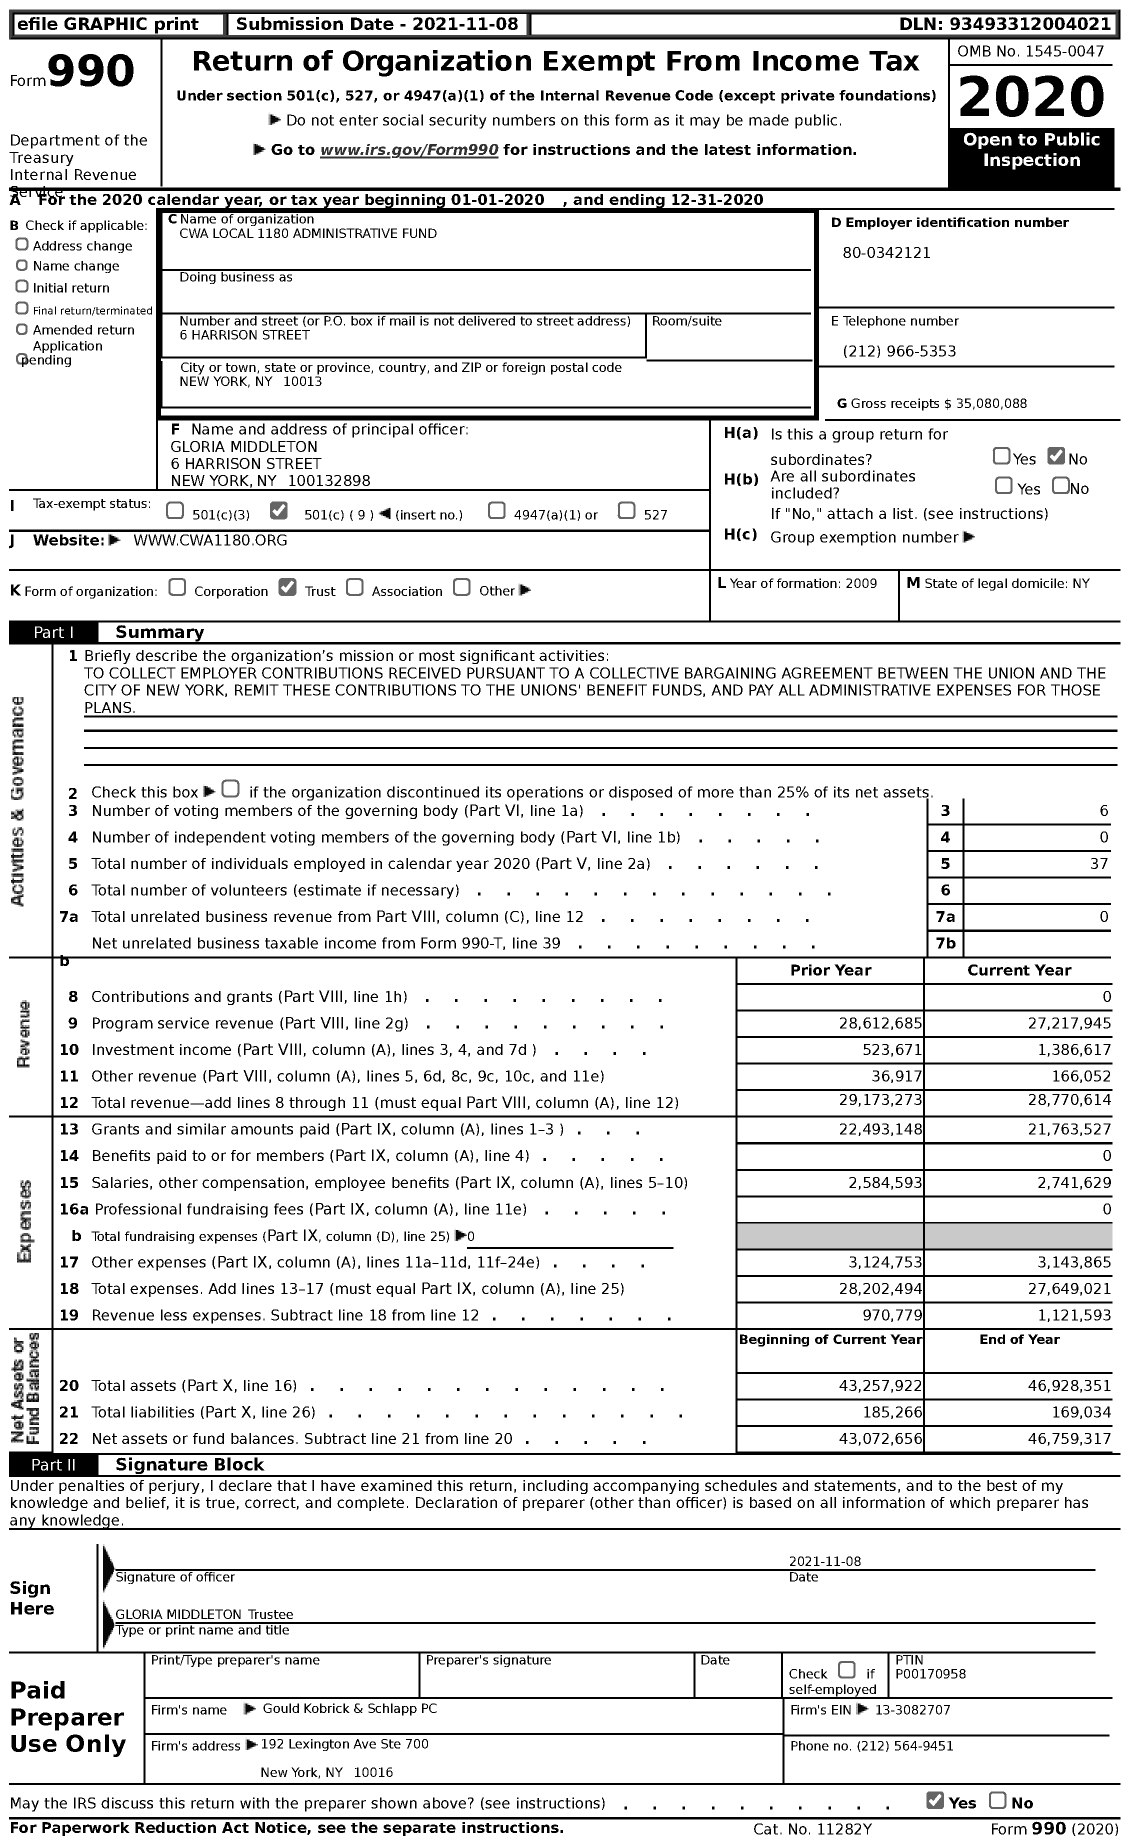 Image of first page of 2020 Form 990 for CWA Local 1180 Administrative Fund